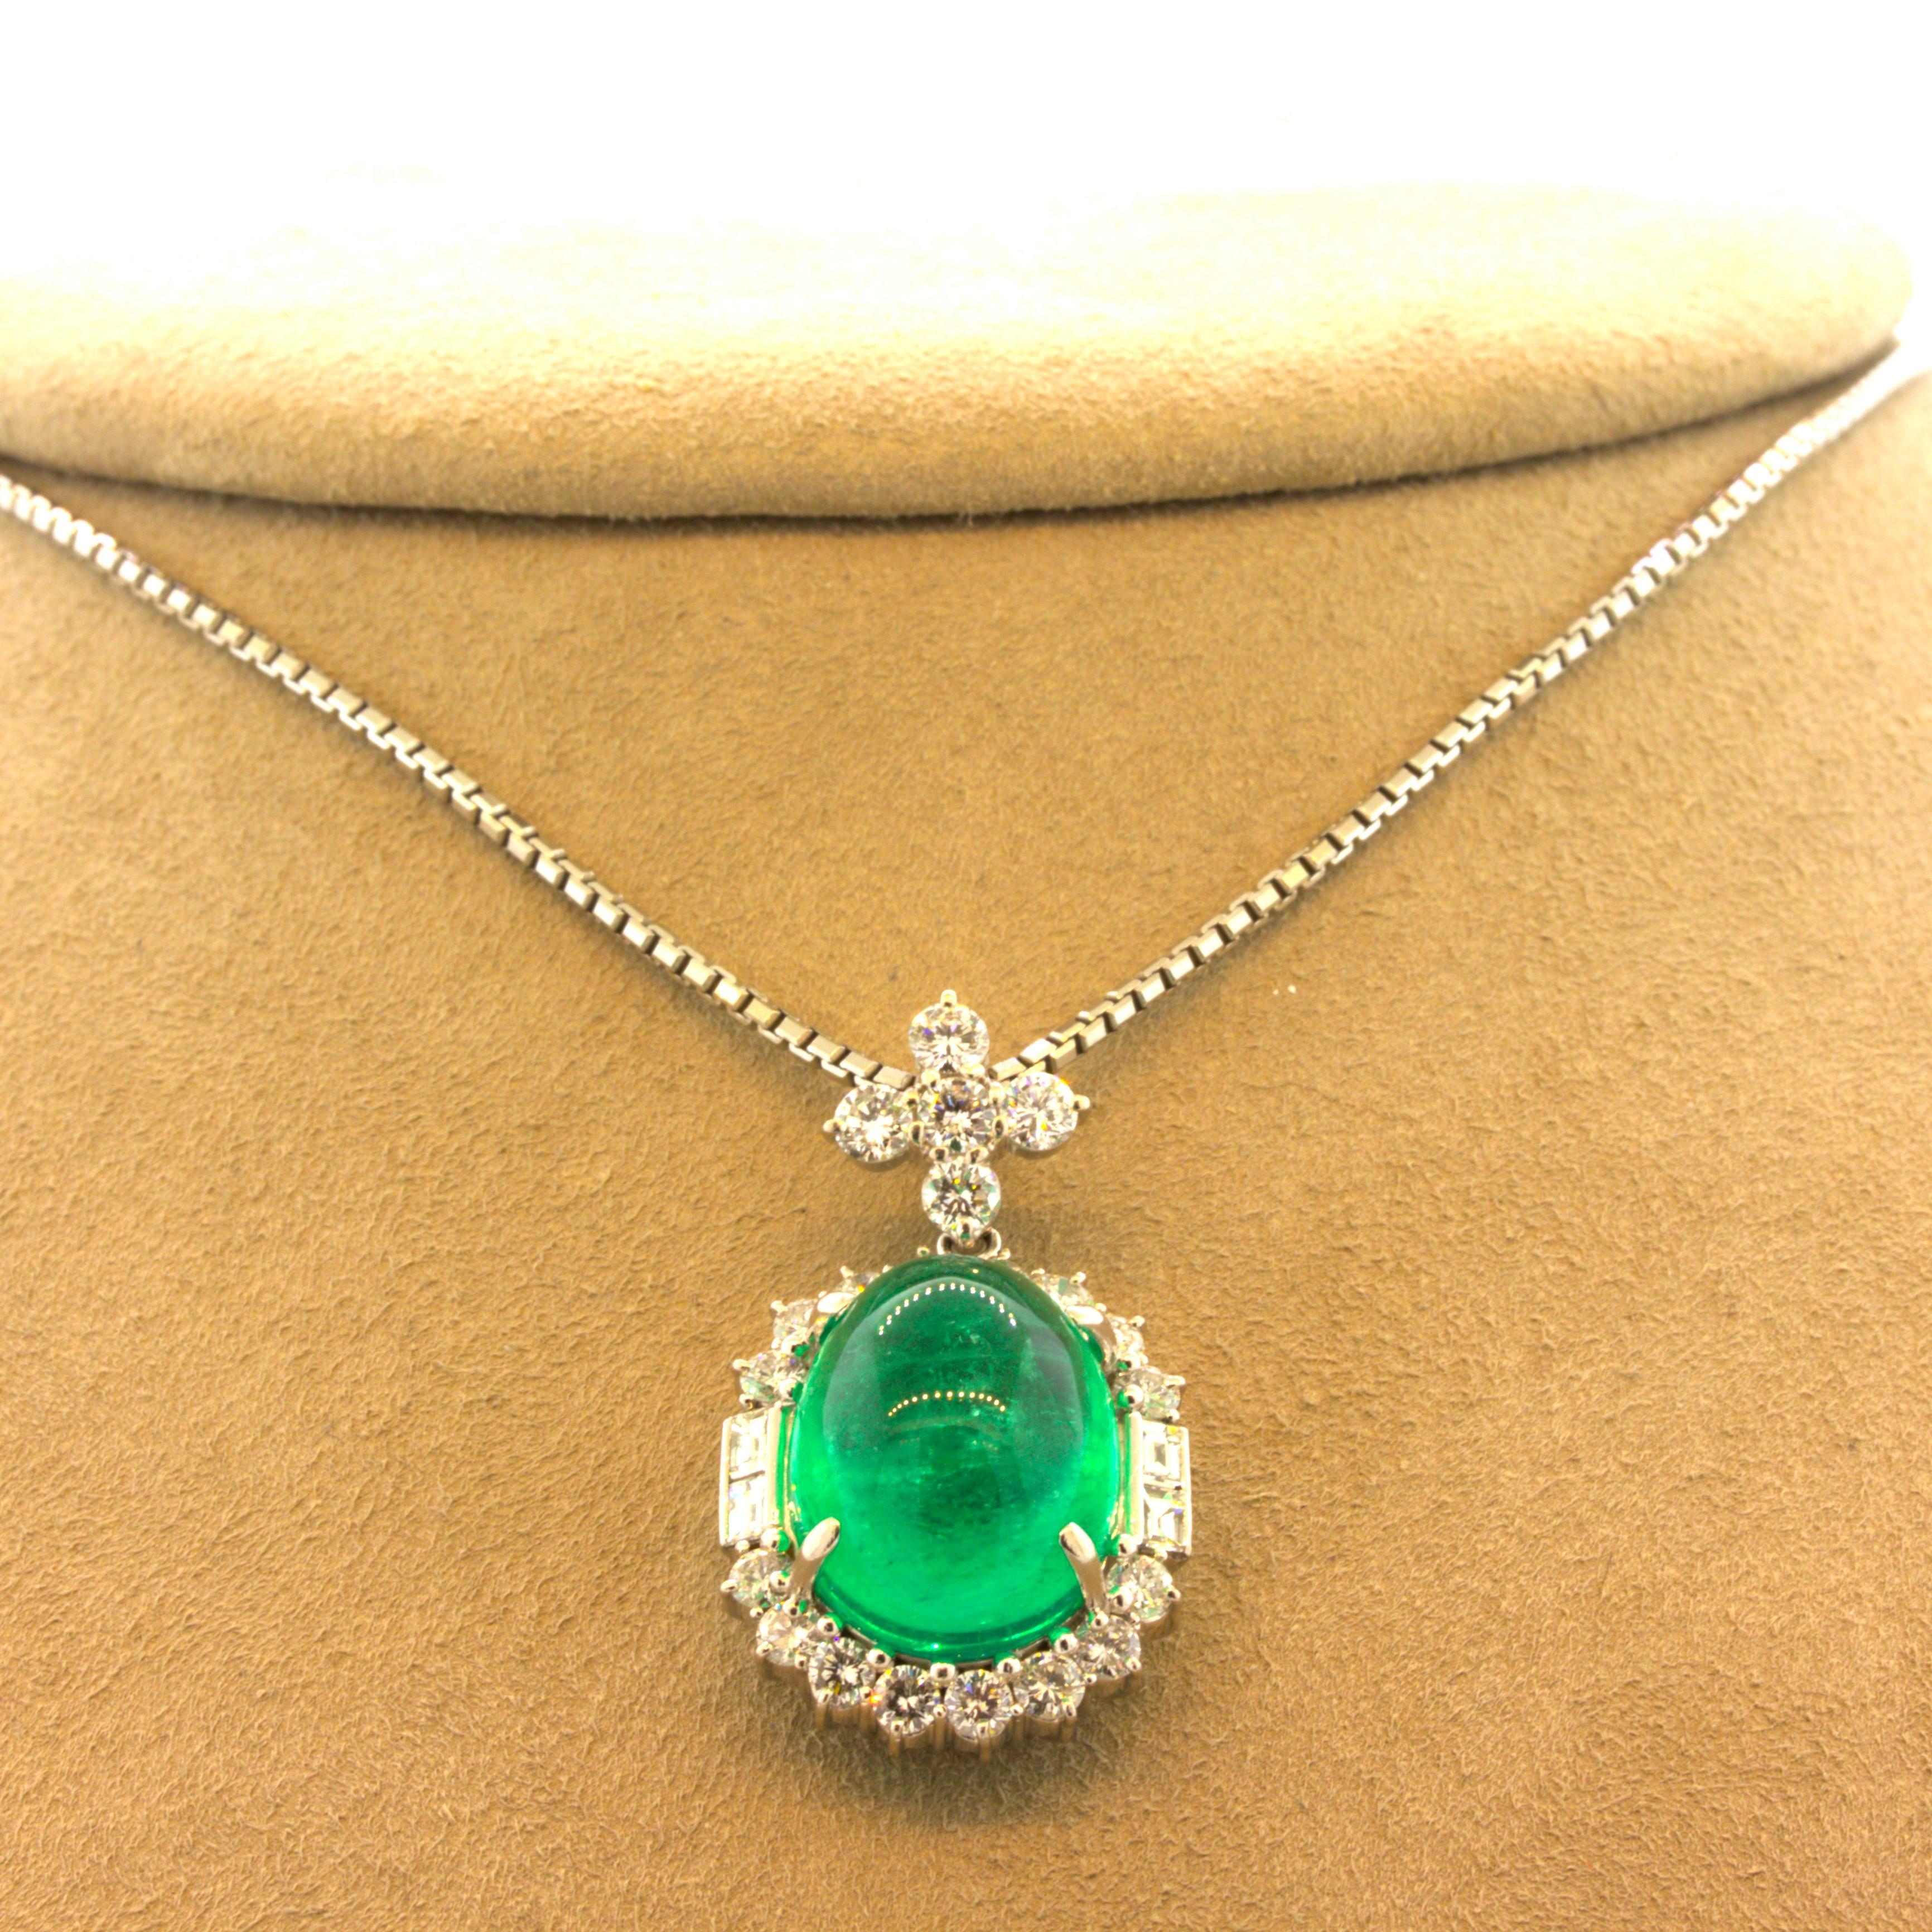 A chic and substantial pendant featuring a large and impressive Colombian emerald. The emerald weighs 14.22 carats and has a bright lively grass green color Colombian emeralds are known for. Adding to that, it is certified by the GIA as natural with